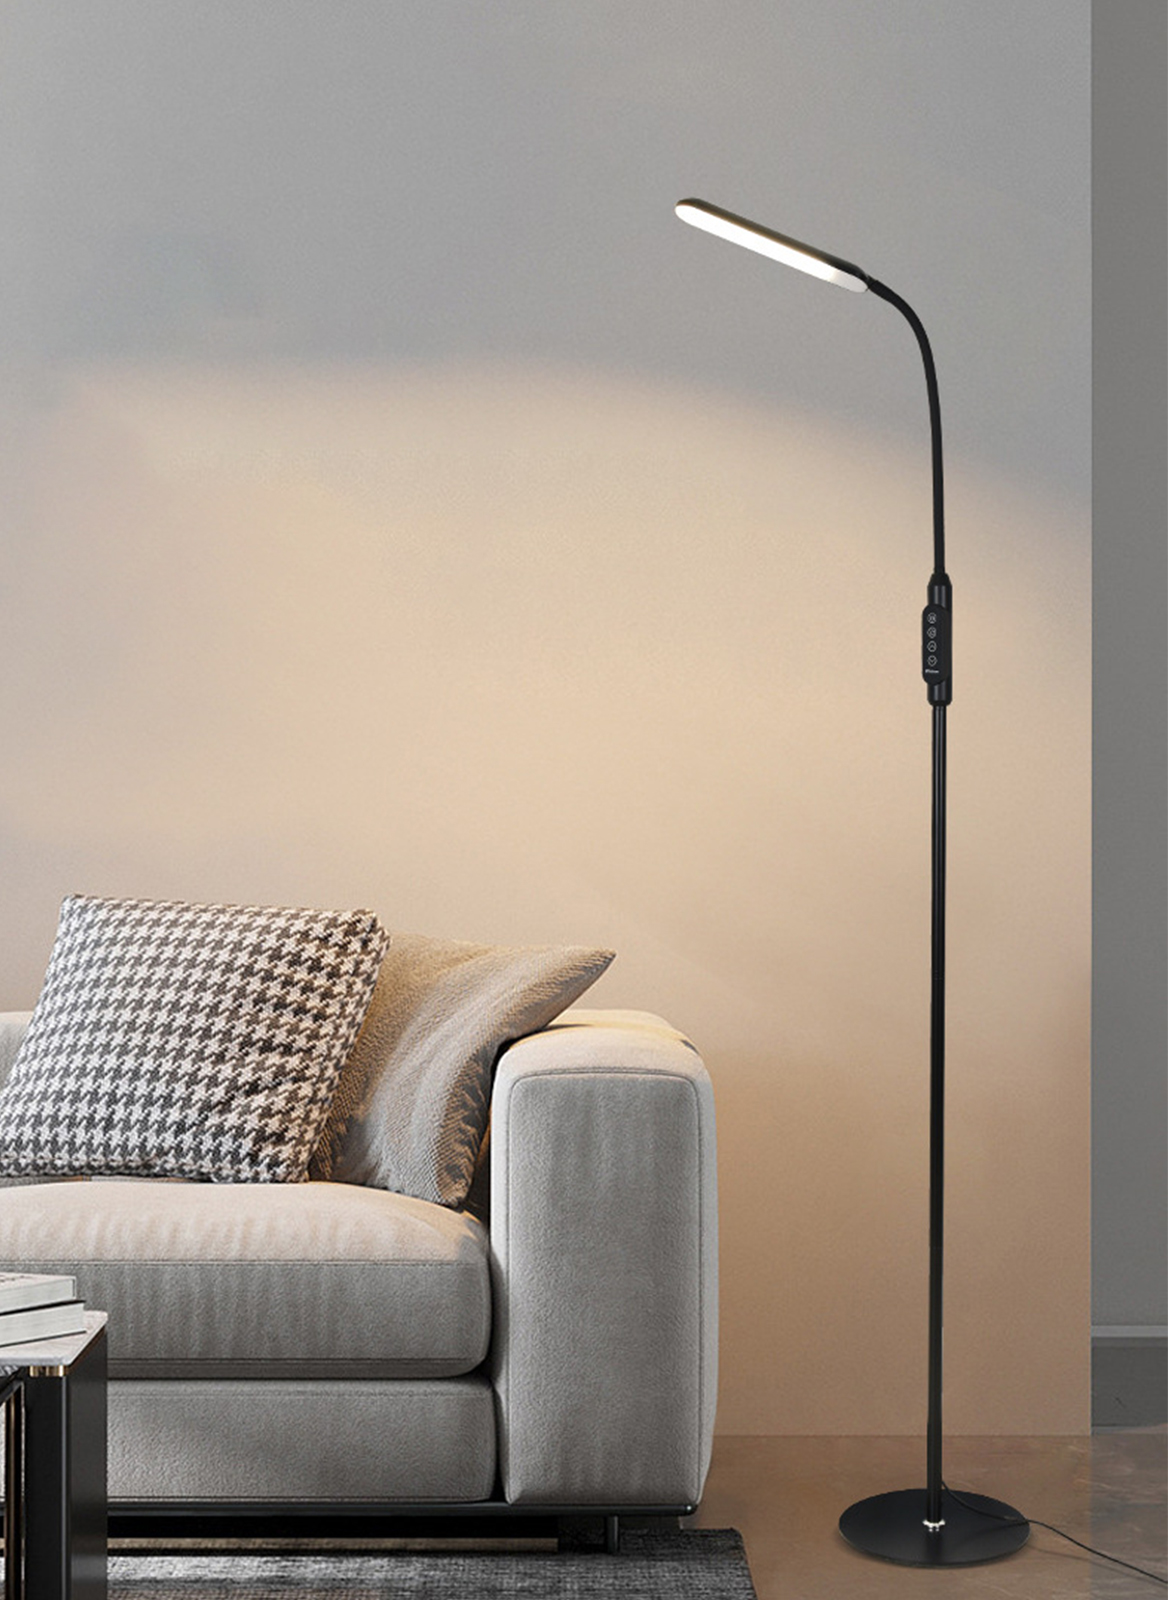 Led Stepless Dimming Vertical Floor Lamp for Living Room and Bedroom, Eye Protection and Table Lamp for Dual Use, Adjustable Color Temperature 12W